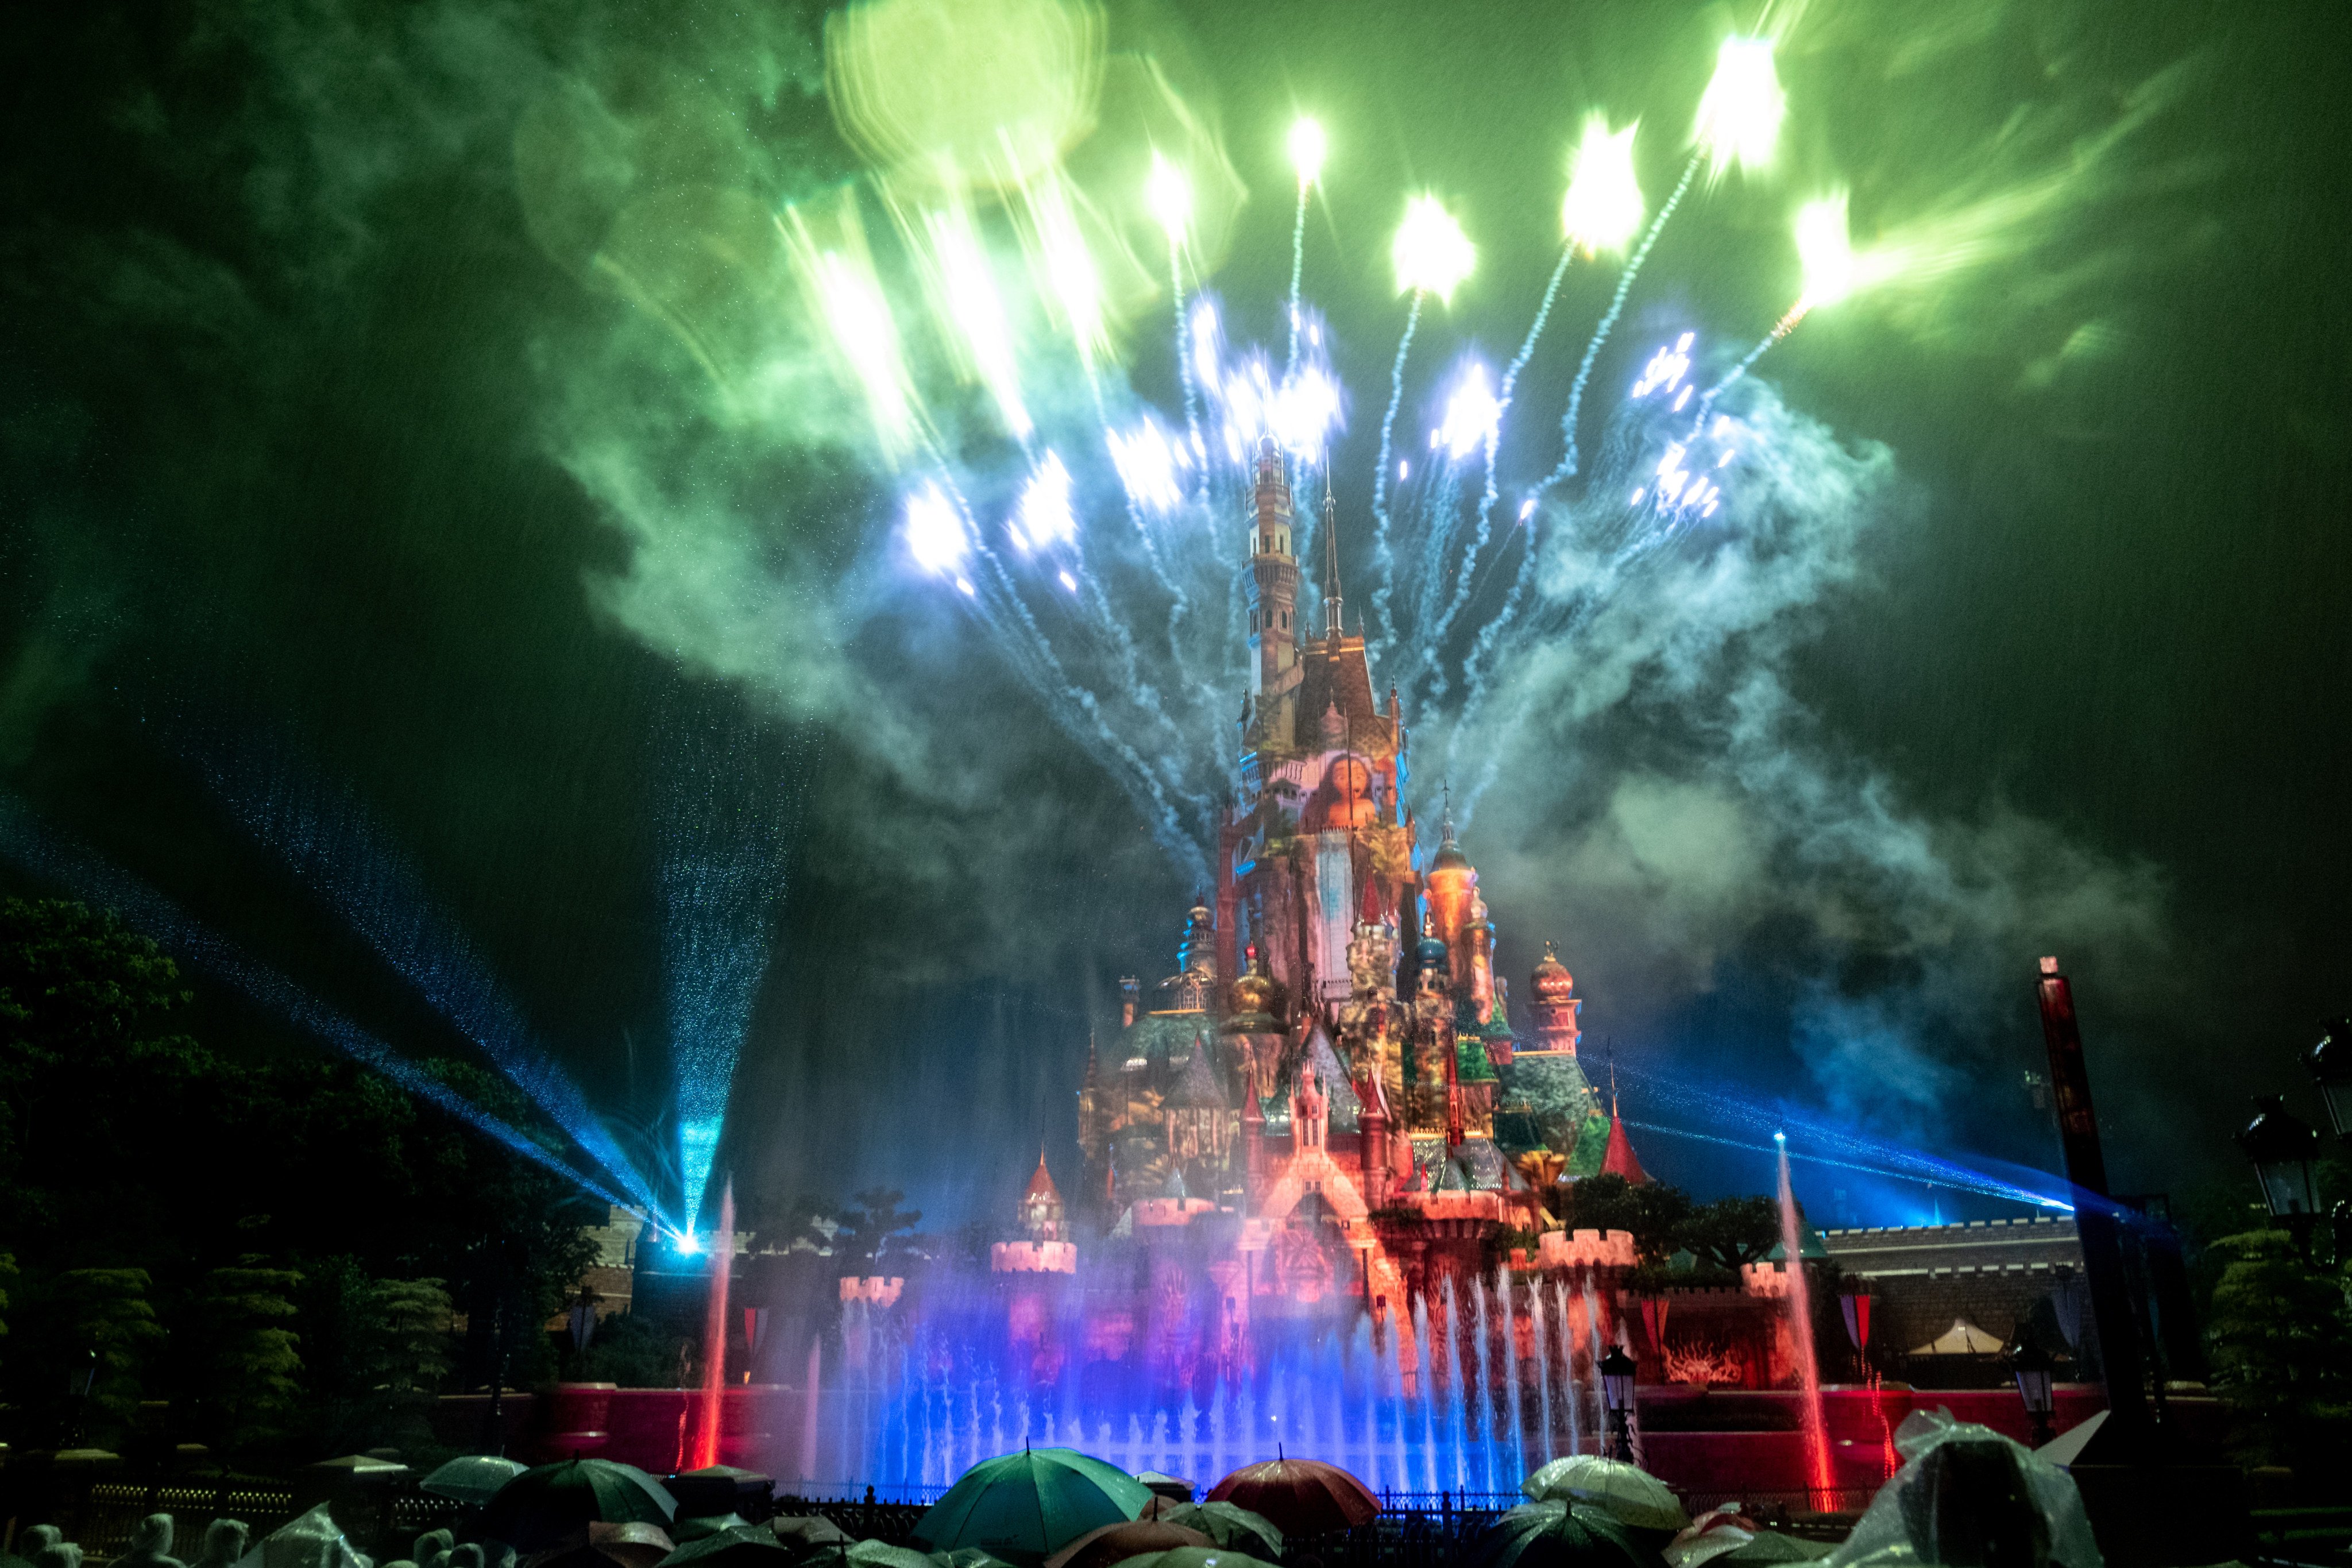 Hong Kong Disneyland debuts its new fireworks display, Momentous, which lights up the sky above the new Castle of Magical Dreams. Photo: Connor Mycroft 